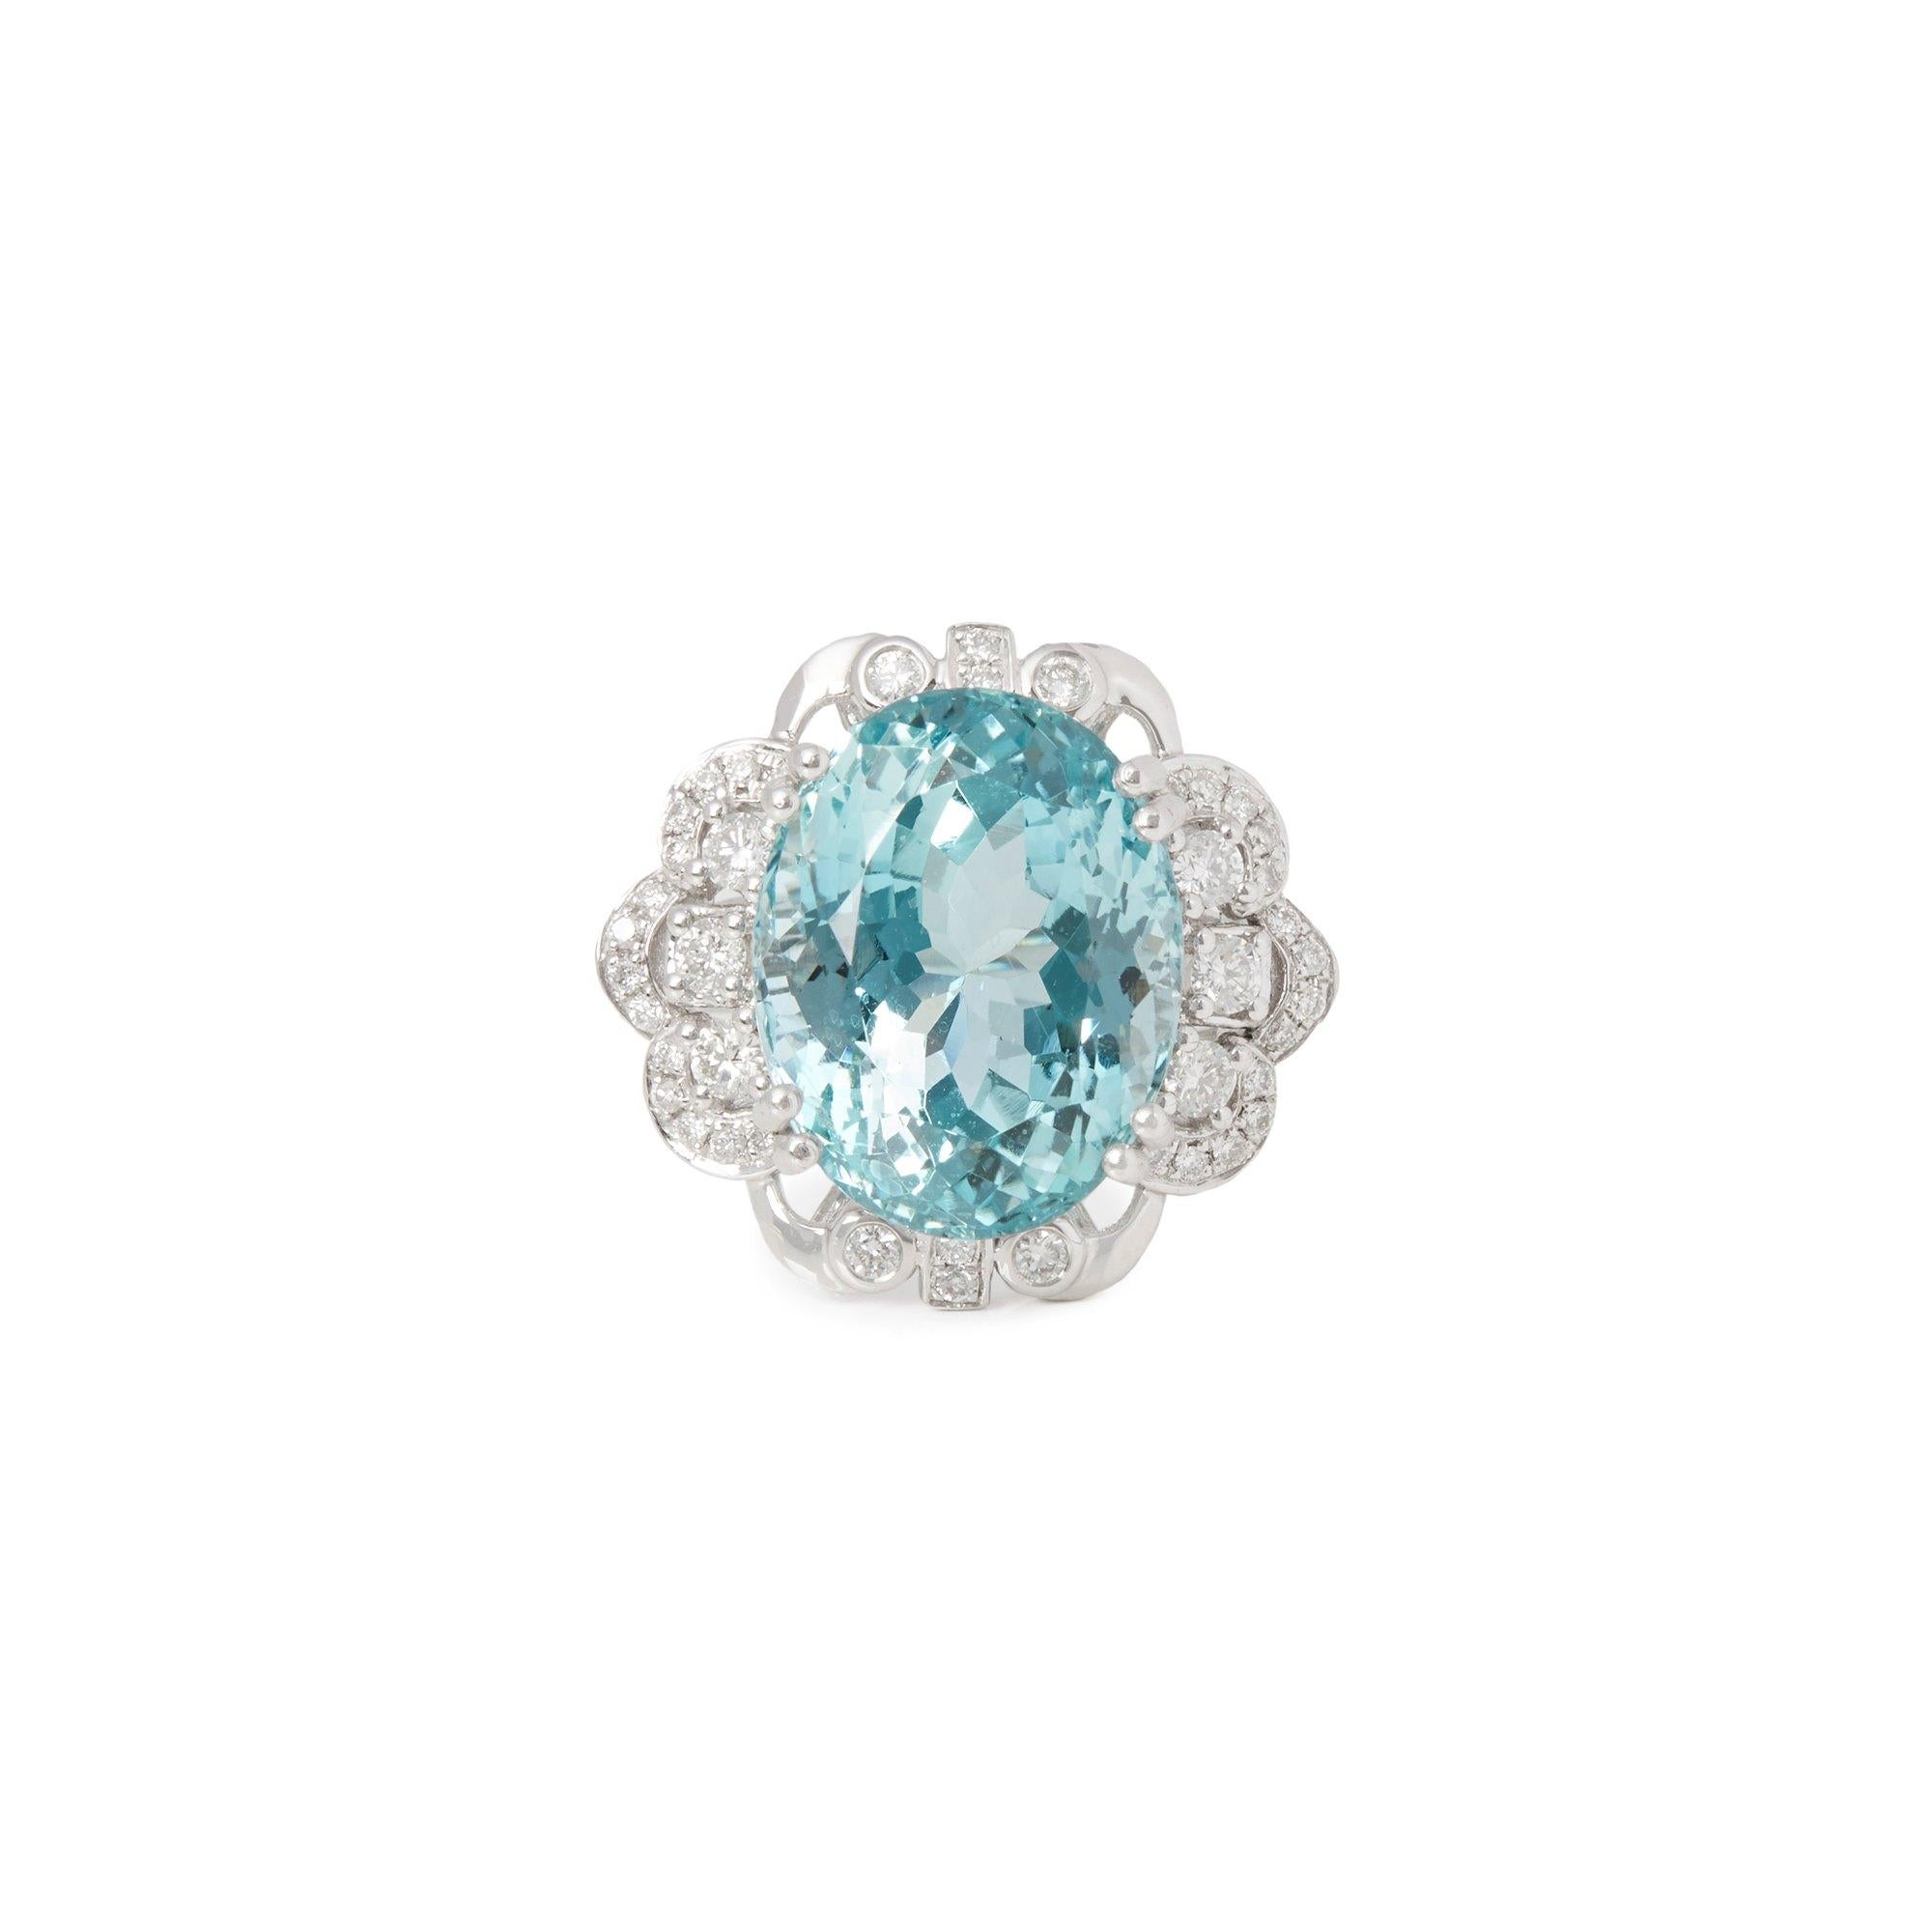 This ring designed by David Jerome is from his private collection and features one cushion cut Aquamarine totalling 12.93cts sourced in Brazil. Set with round brilliant cut Diamonds totalling 0.56cts mounted in an platinum setting. Finger size UK N,